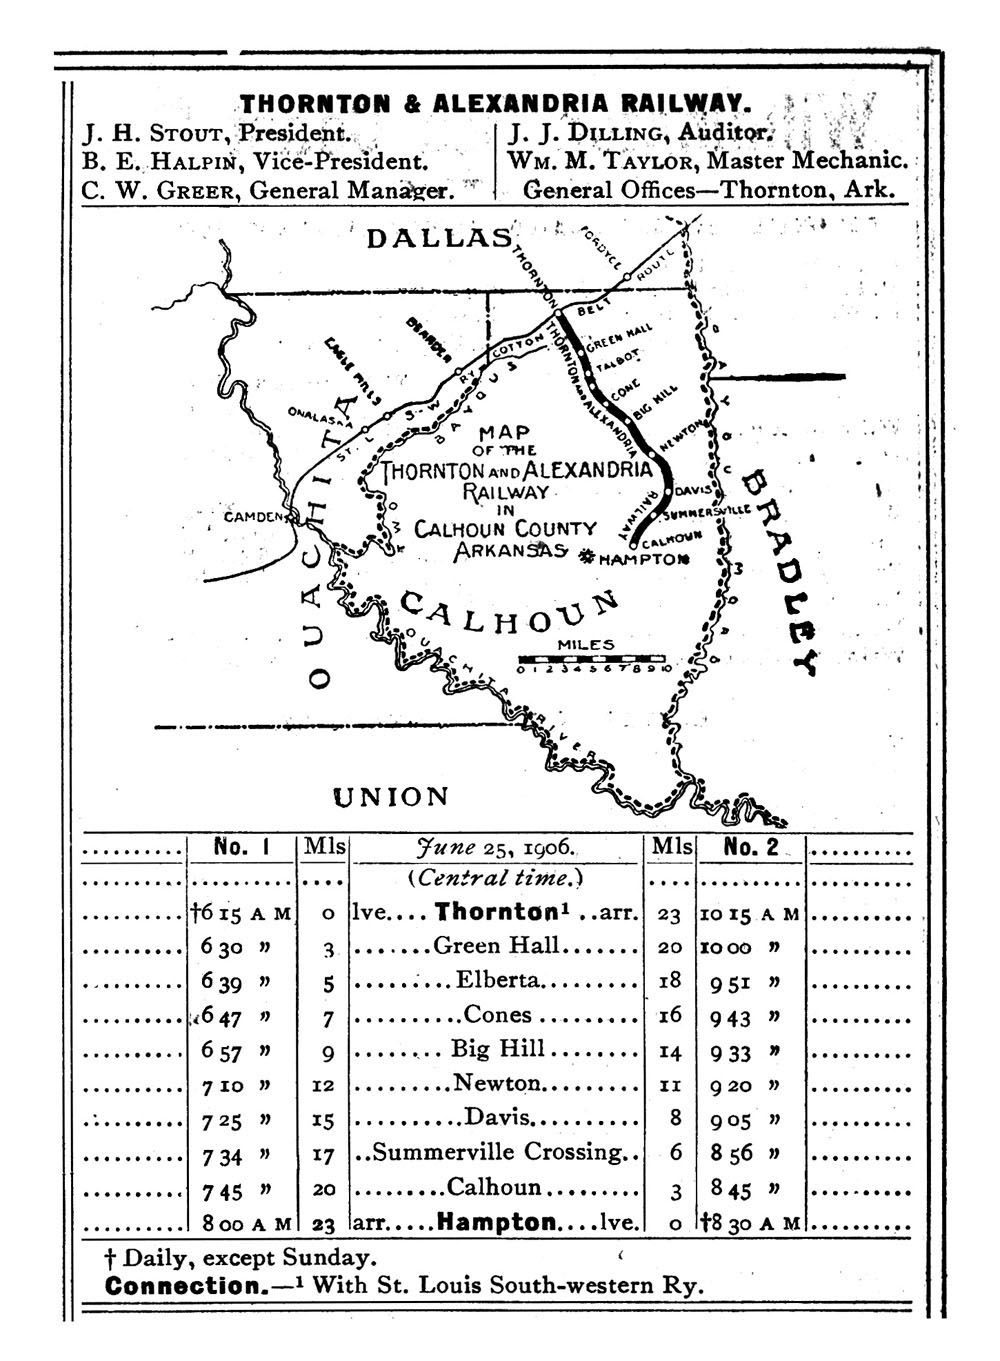 Thornton & Alexandria Railway Company (Ark.), Public Timetable and Map Showing Route in 1906.